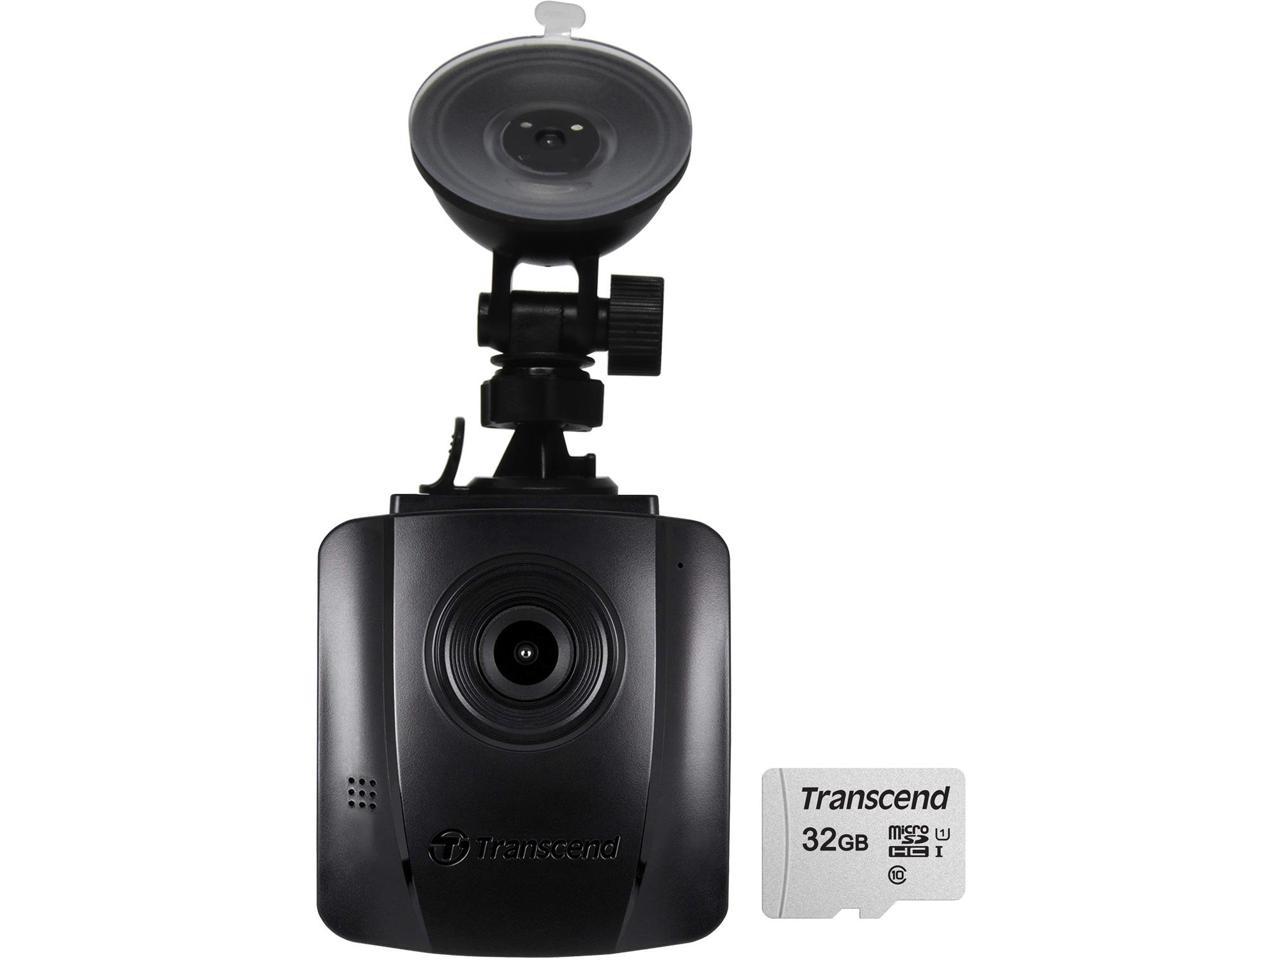 Transcend DrivePro 110 1080p Car Dashboard Video Camera with Suction Mount Includes 32GB Memory Card